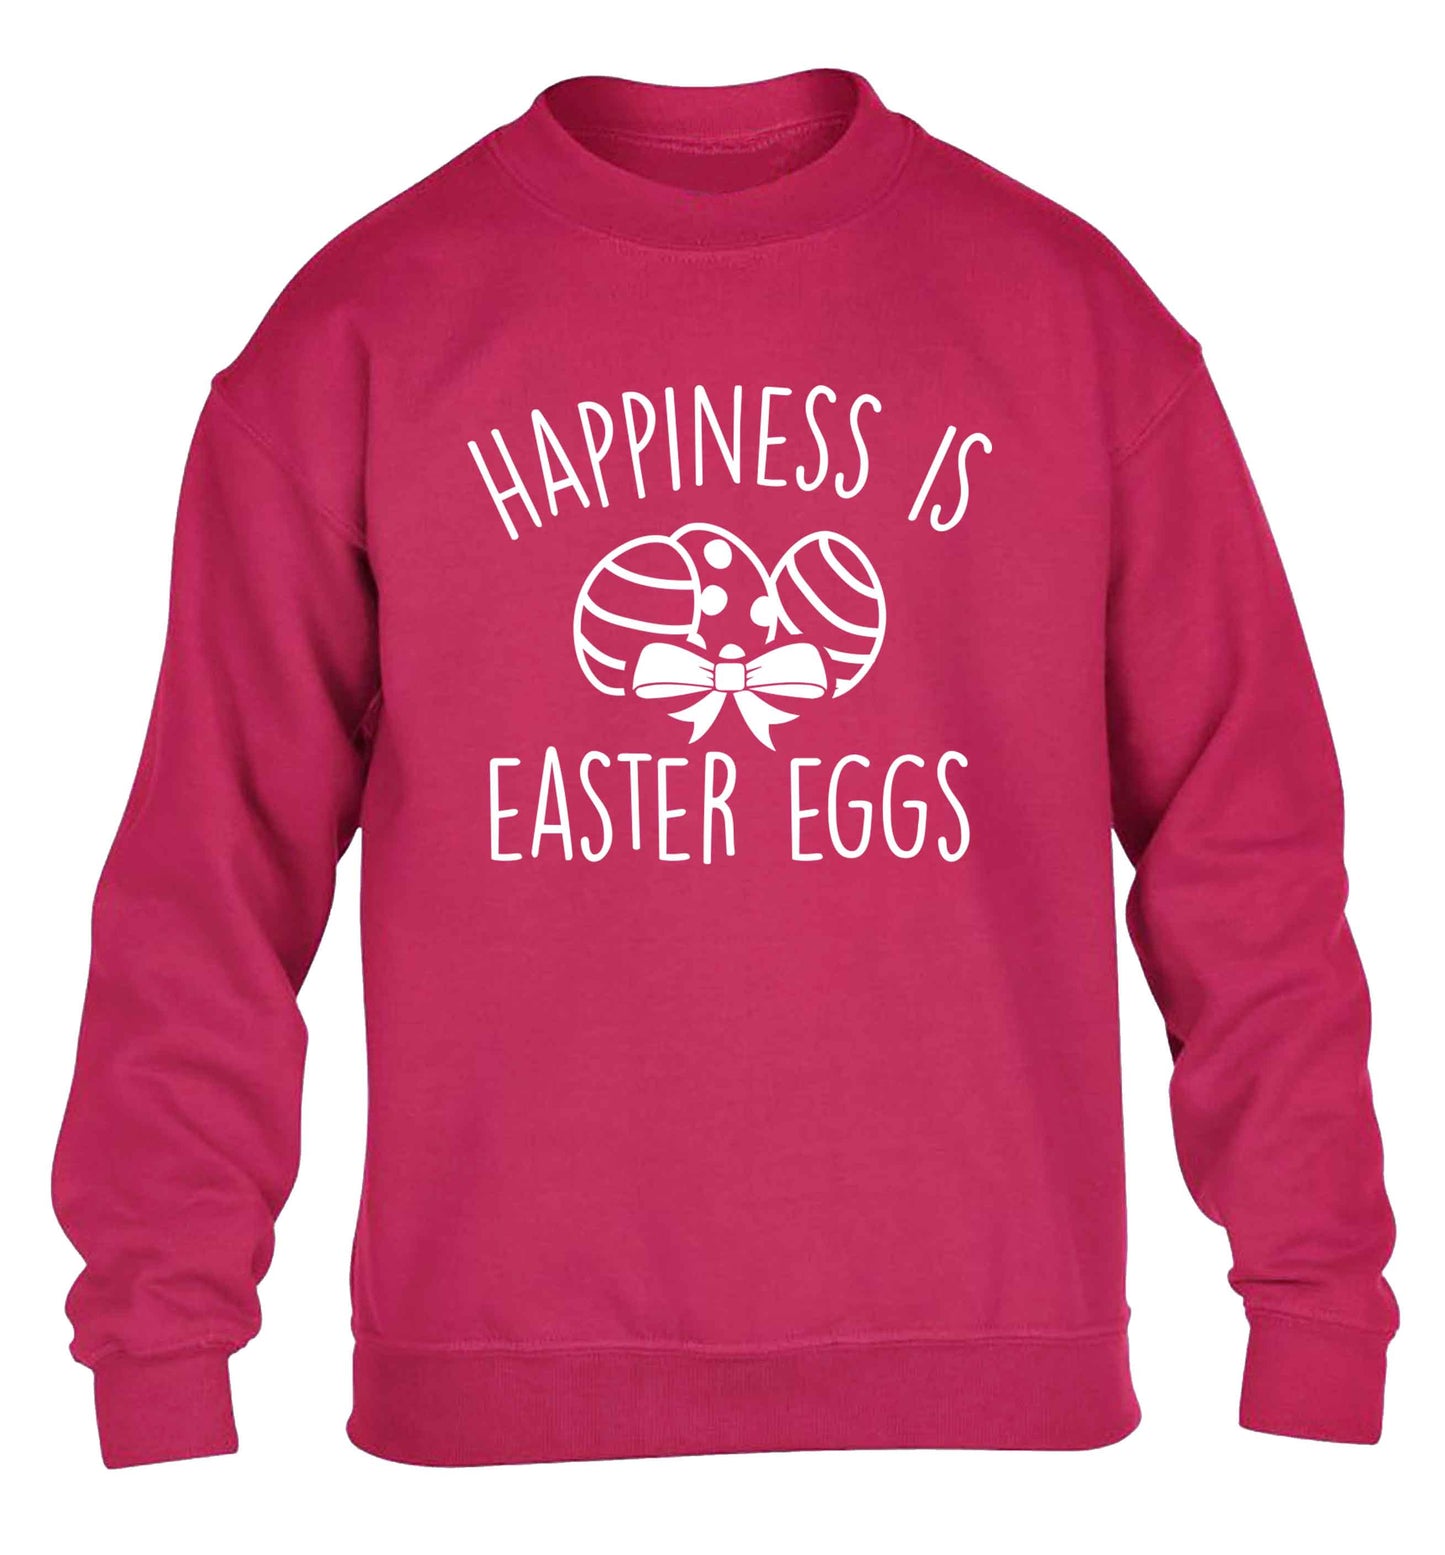 Happiness is Easter eggs children's pink sweater 12-13 Years